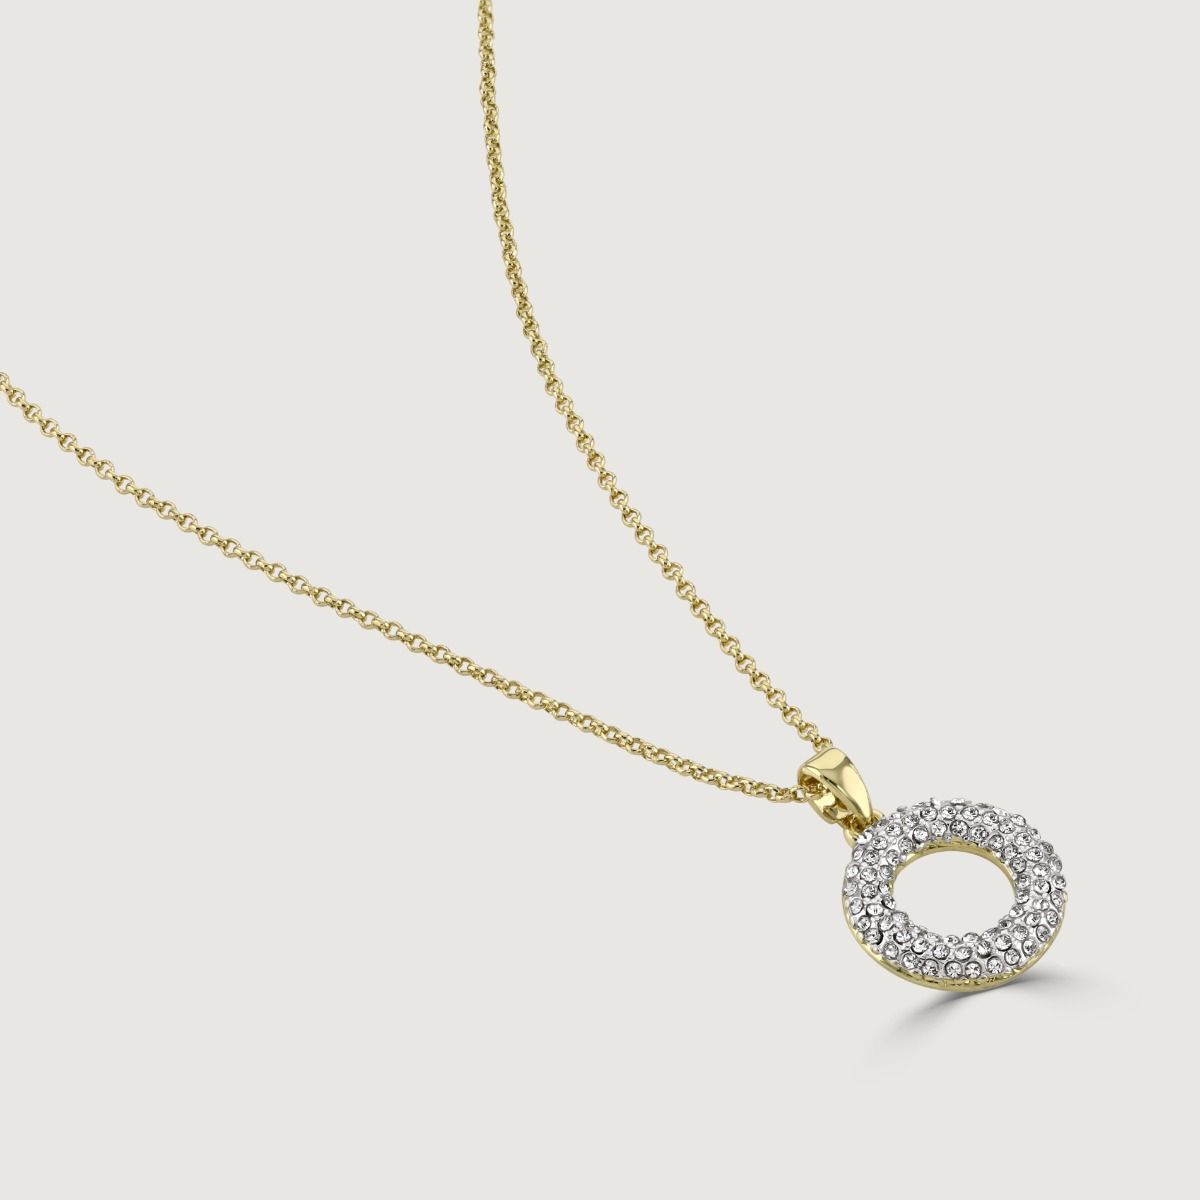 The Two-Tone Pave Pendant is a classic accessory that radiates elegance and charm. With its stunning combination of intricate pave detailing and gold chain work, it adds a touch of sophistication to any outfit. 